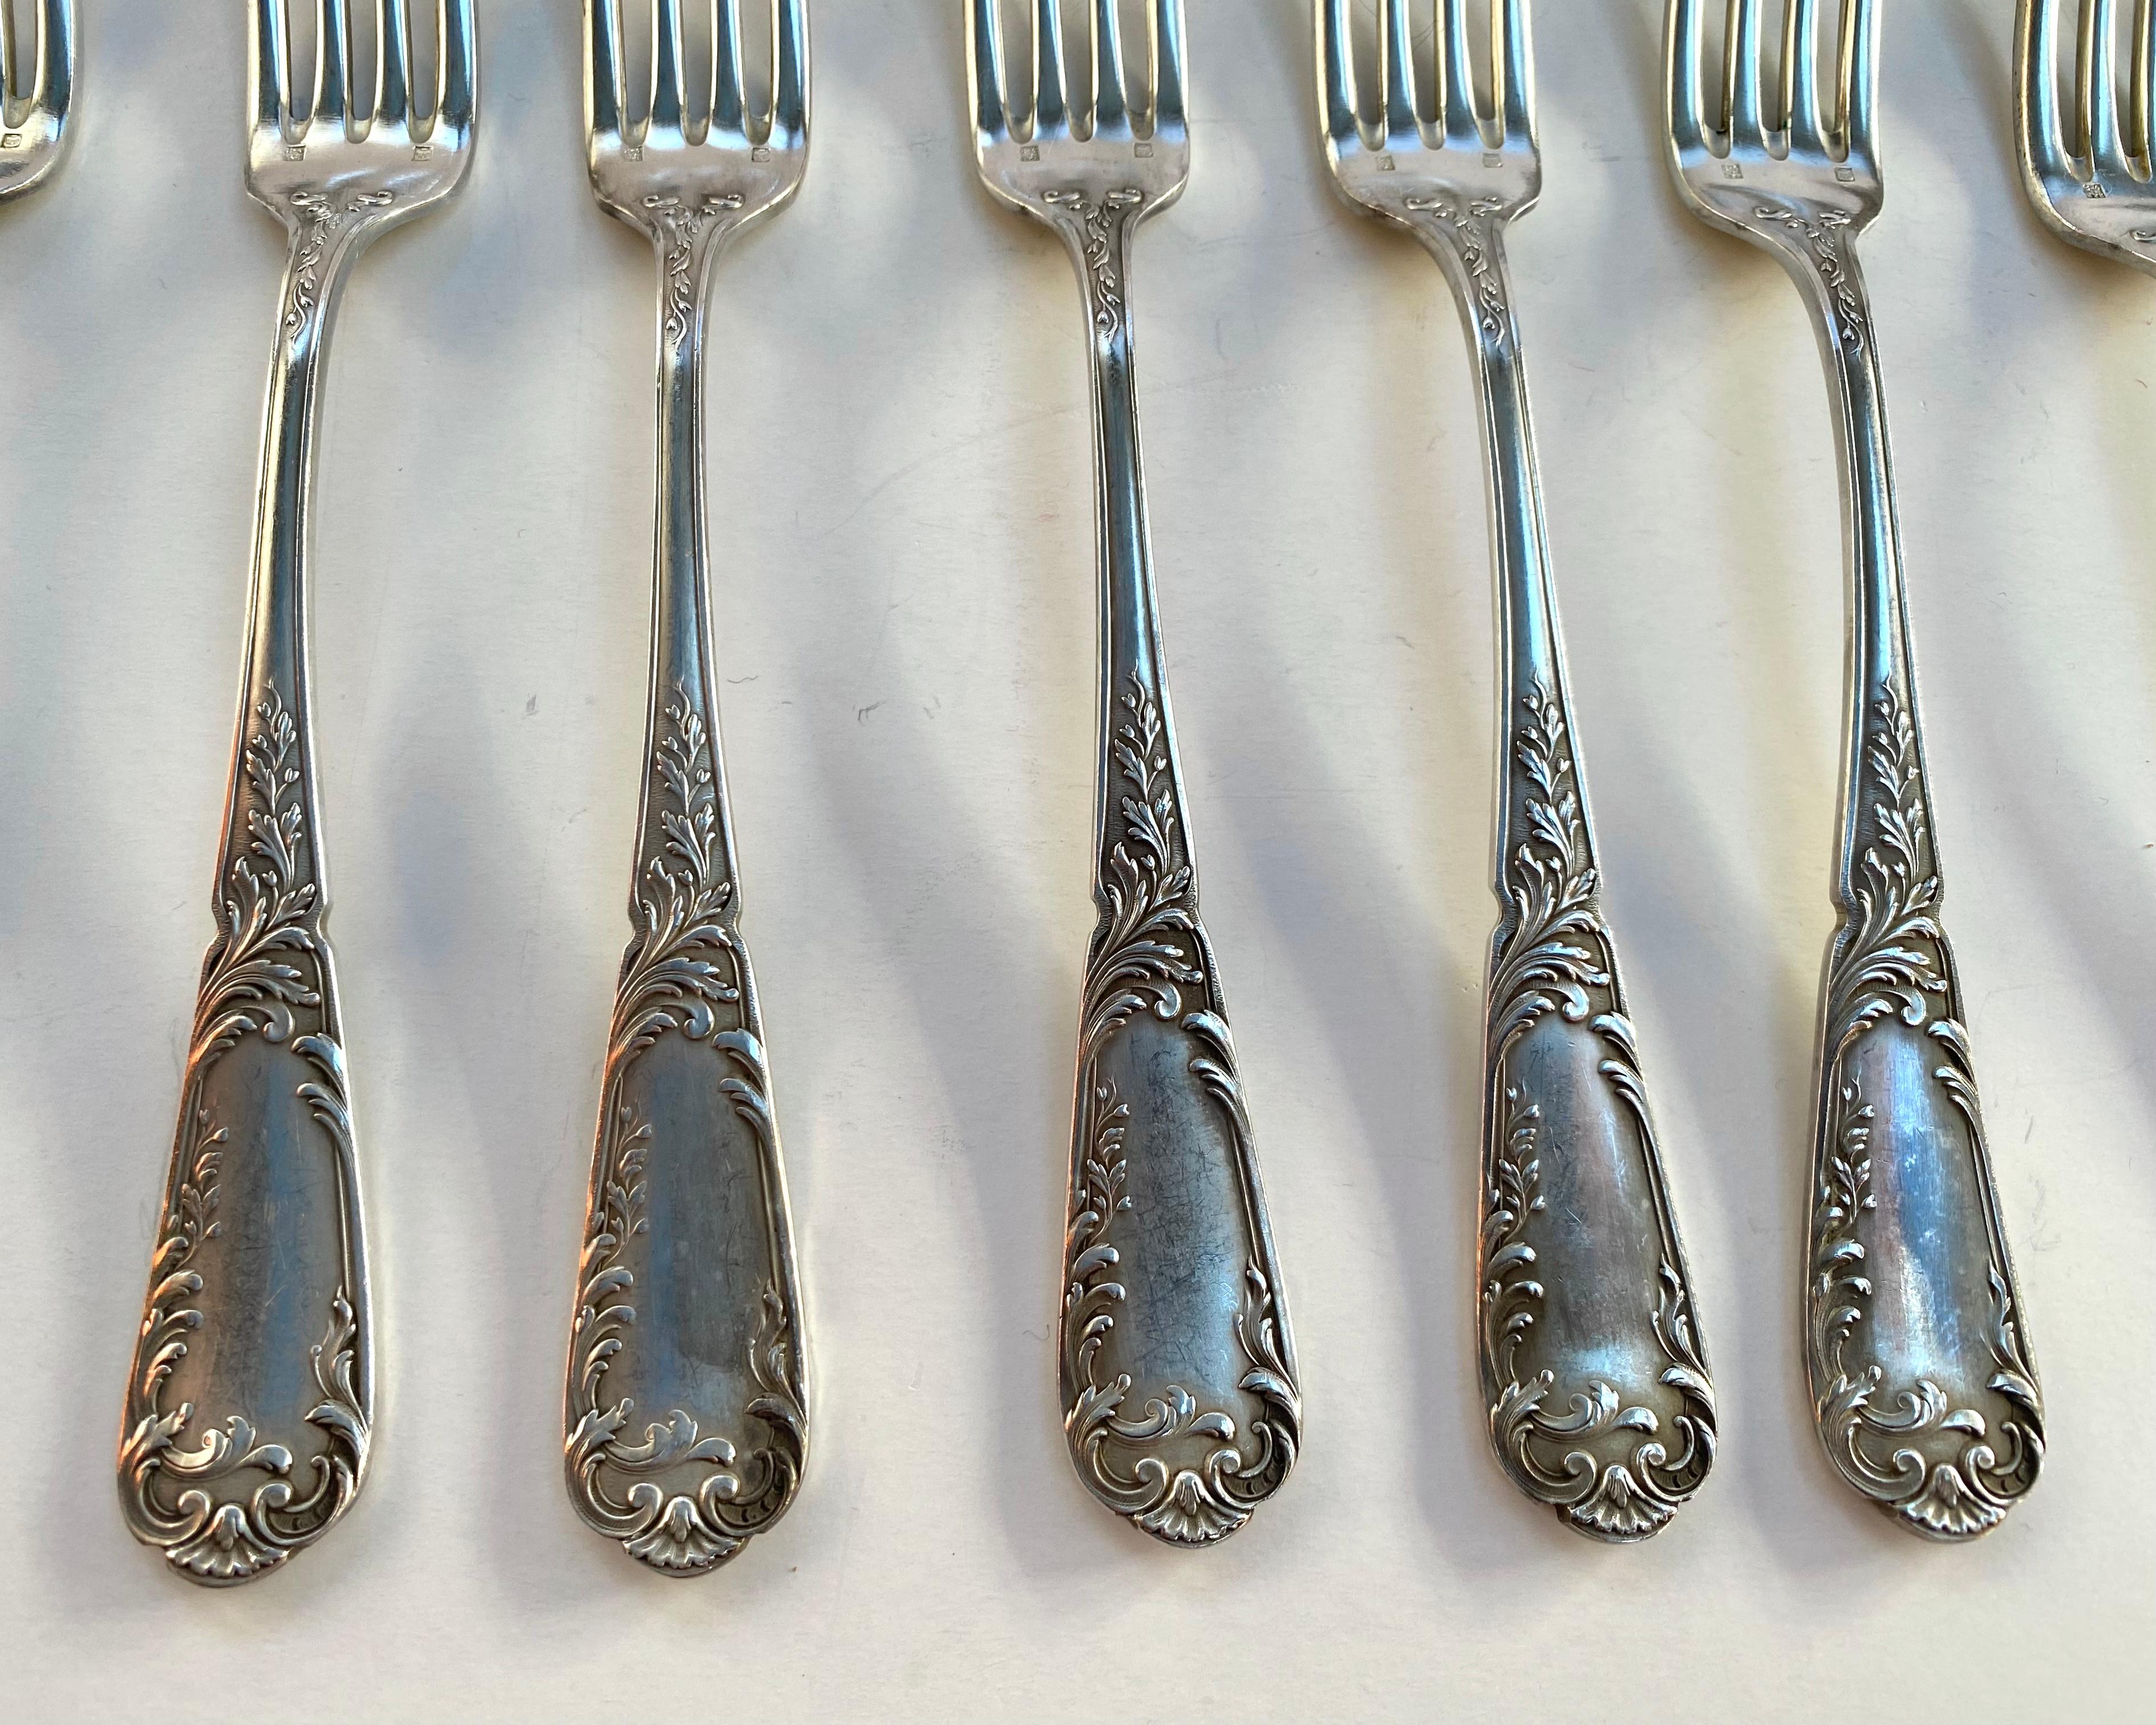 Mid-20th Century Vintage Silver Plate Utensils 12 Spoons 12 Forks France 1950s For Sale